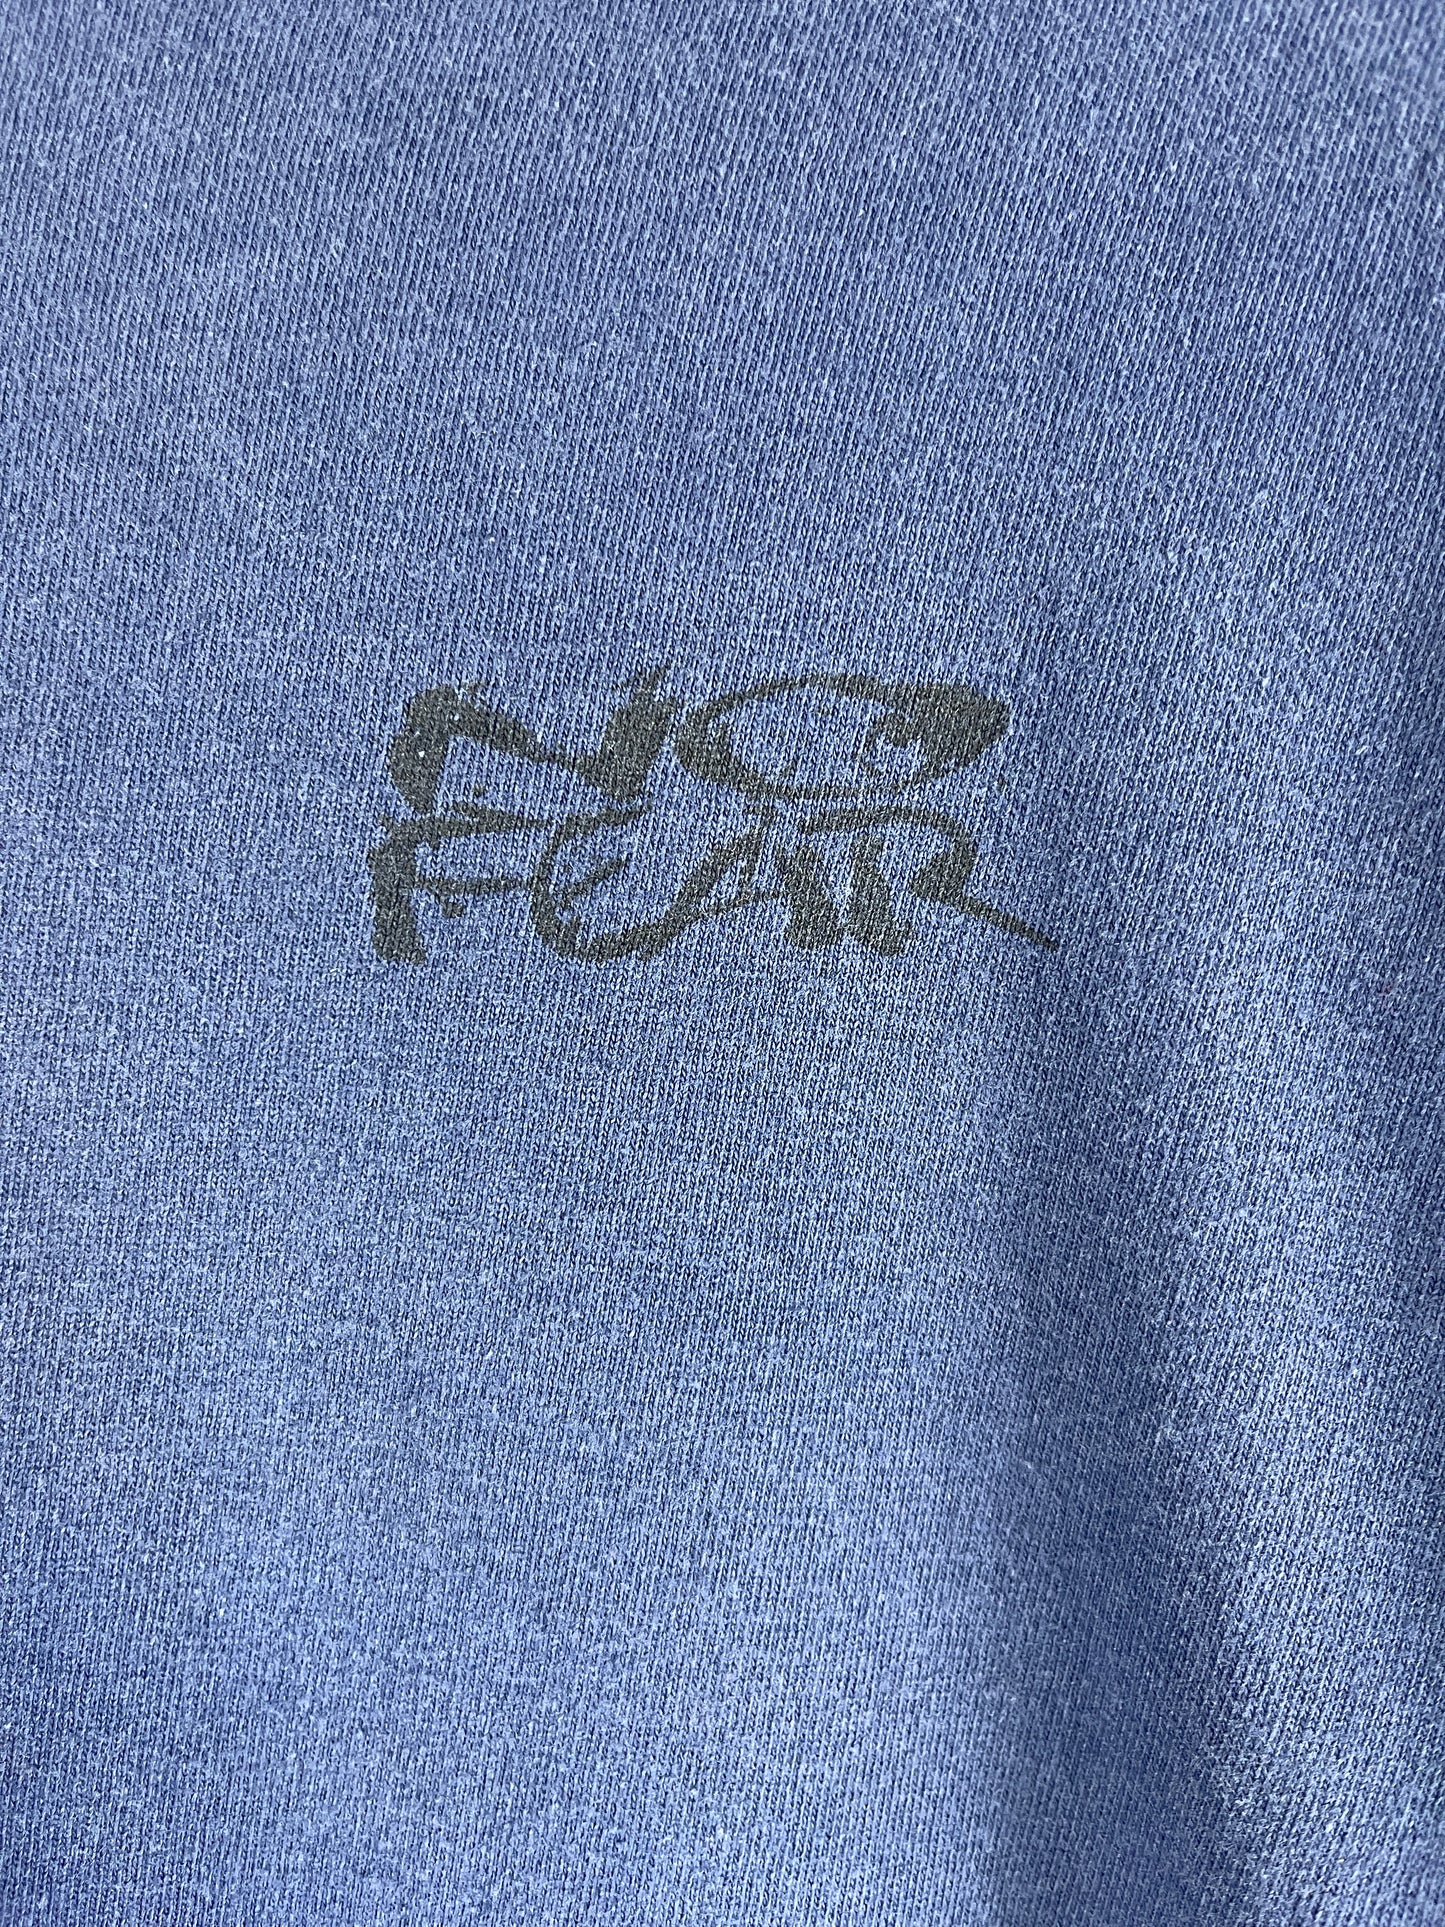 Vintage No Fear 90's Made in USA Skateboard T-shirt